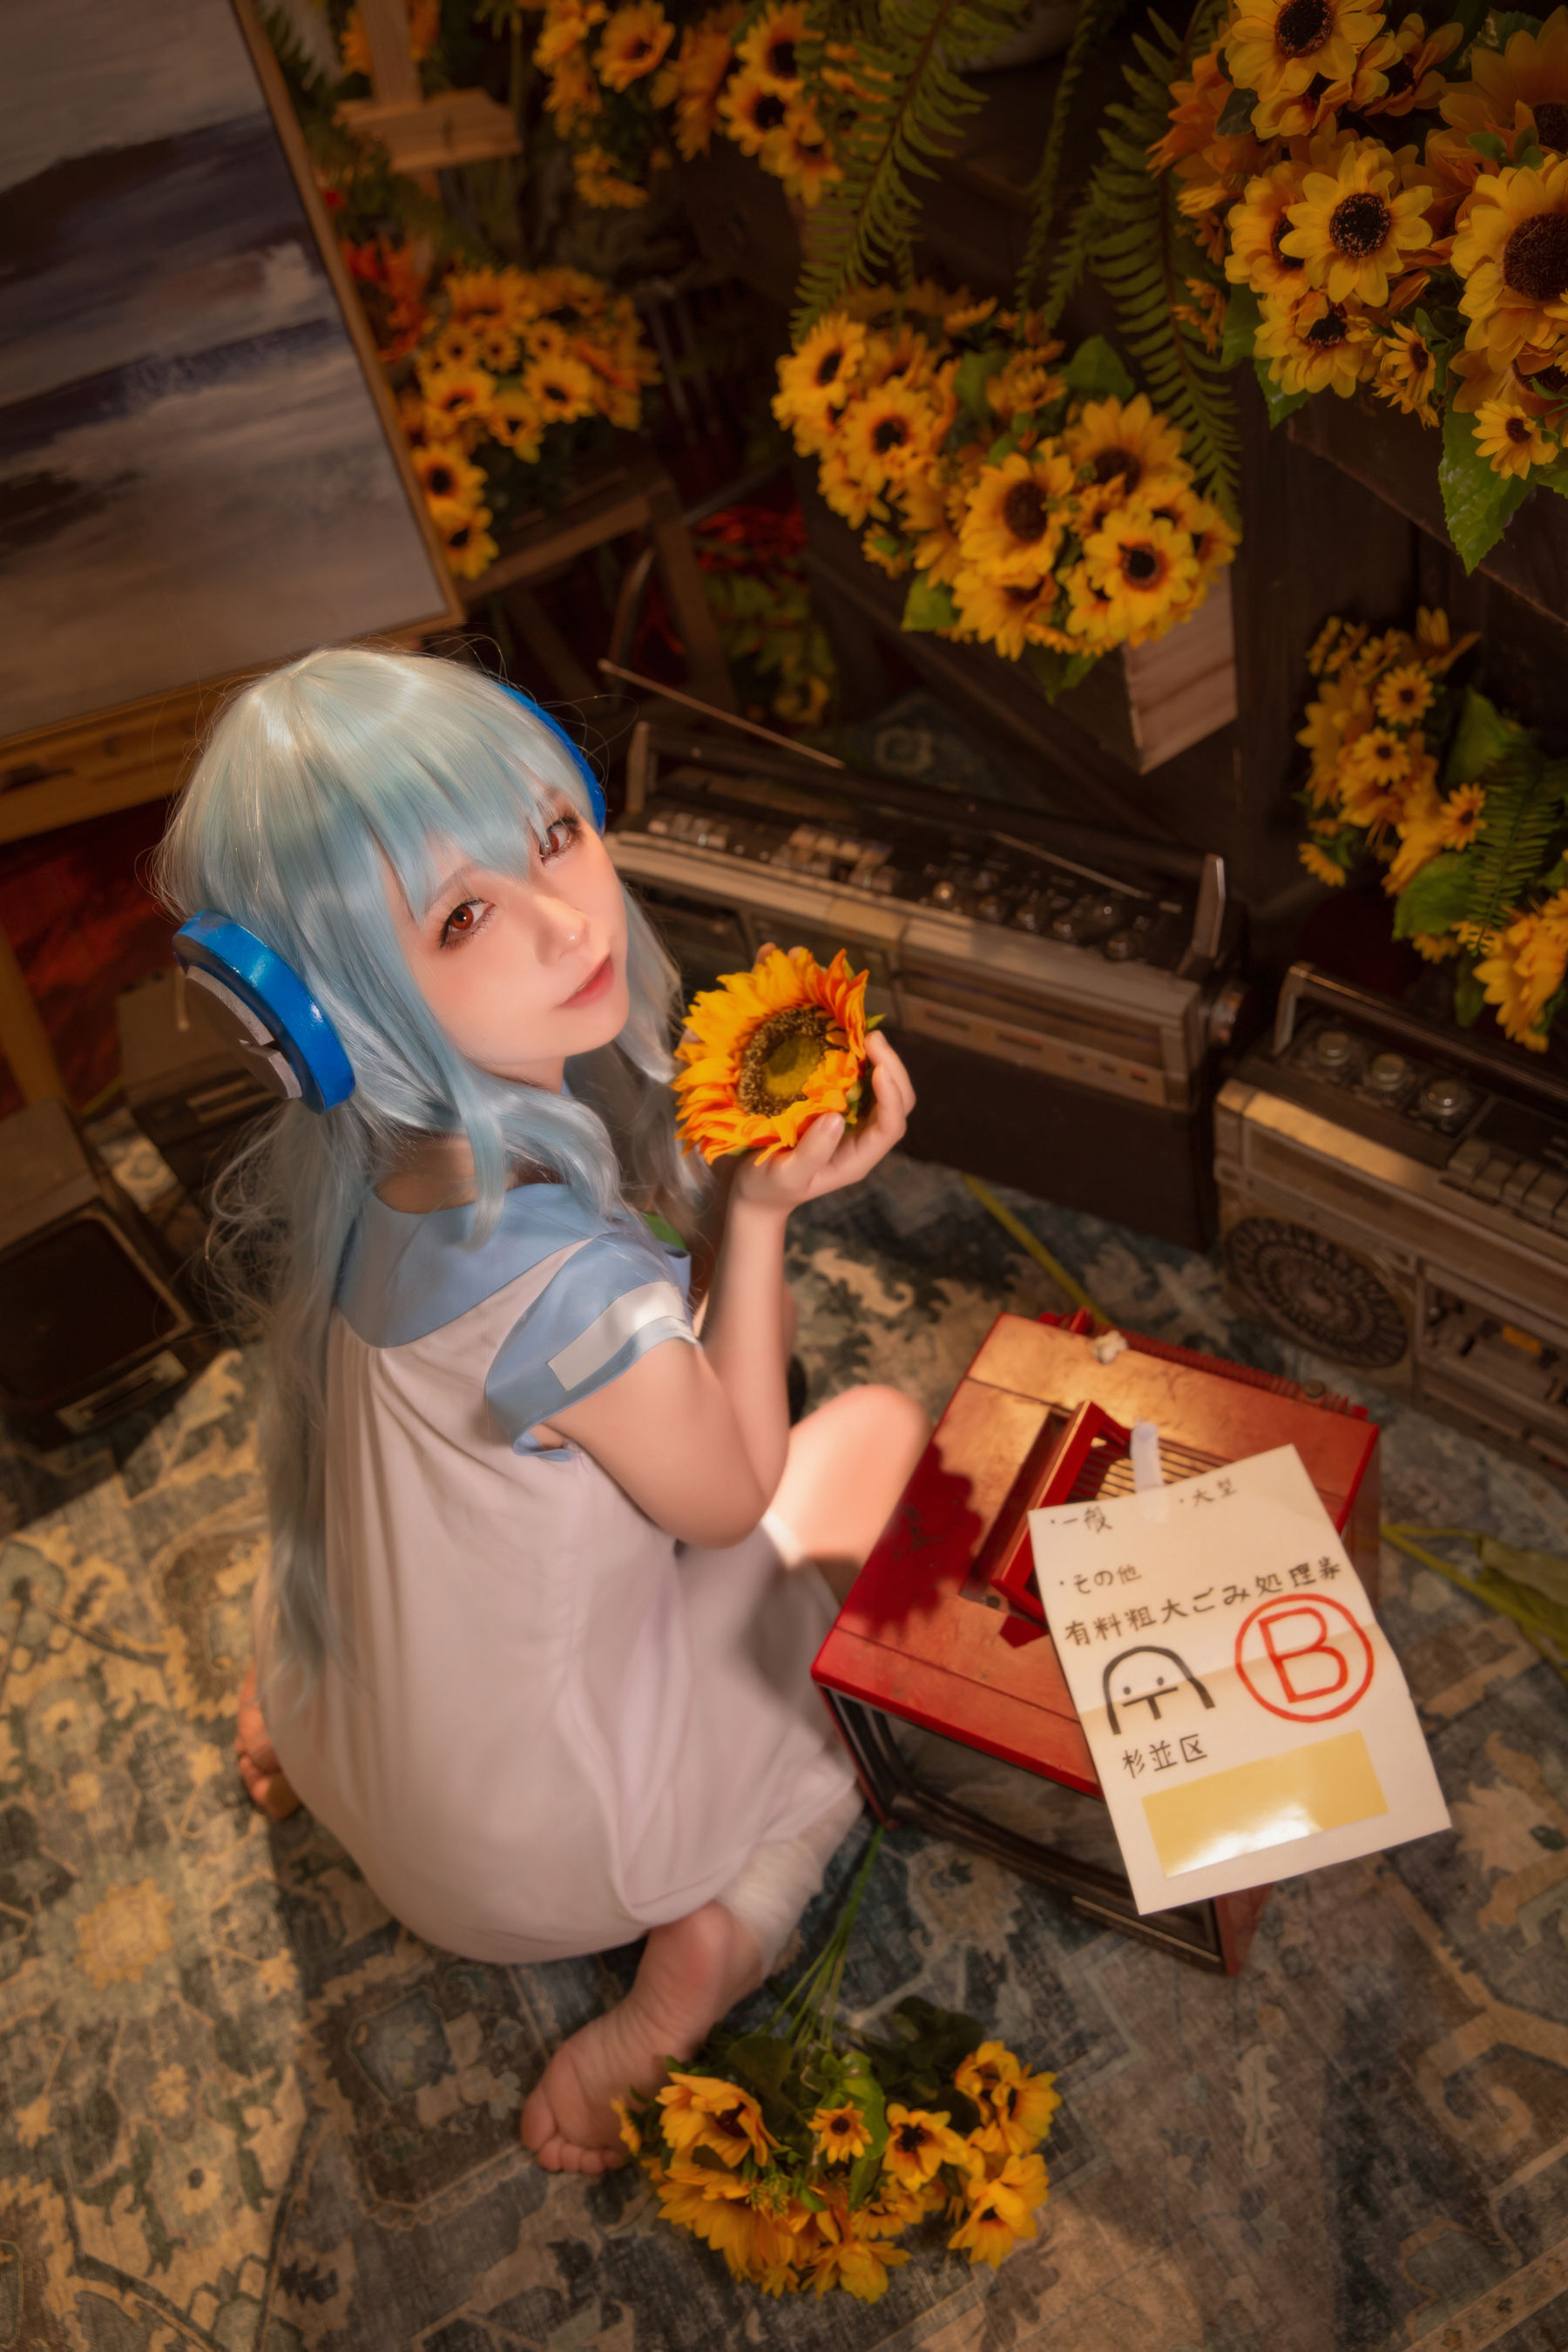 [Net Red COSER Photo] Anime blogger G44 will not be hurt - Music Box Page 8 No.1672fd